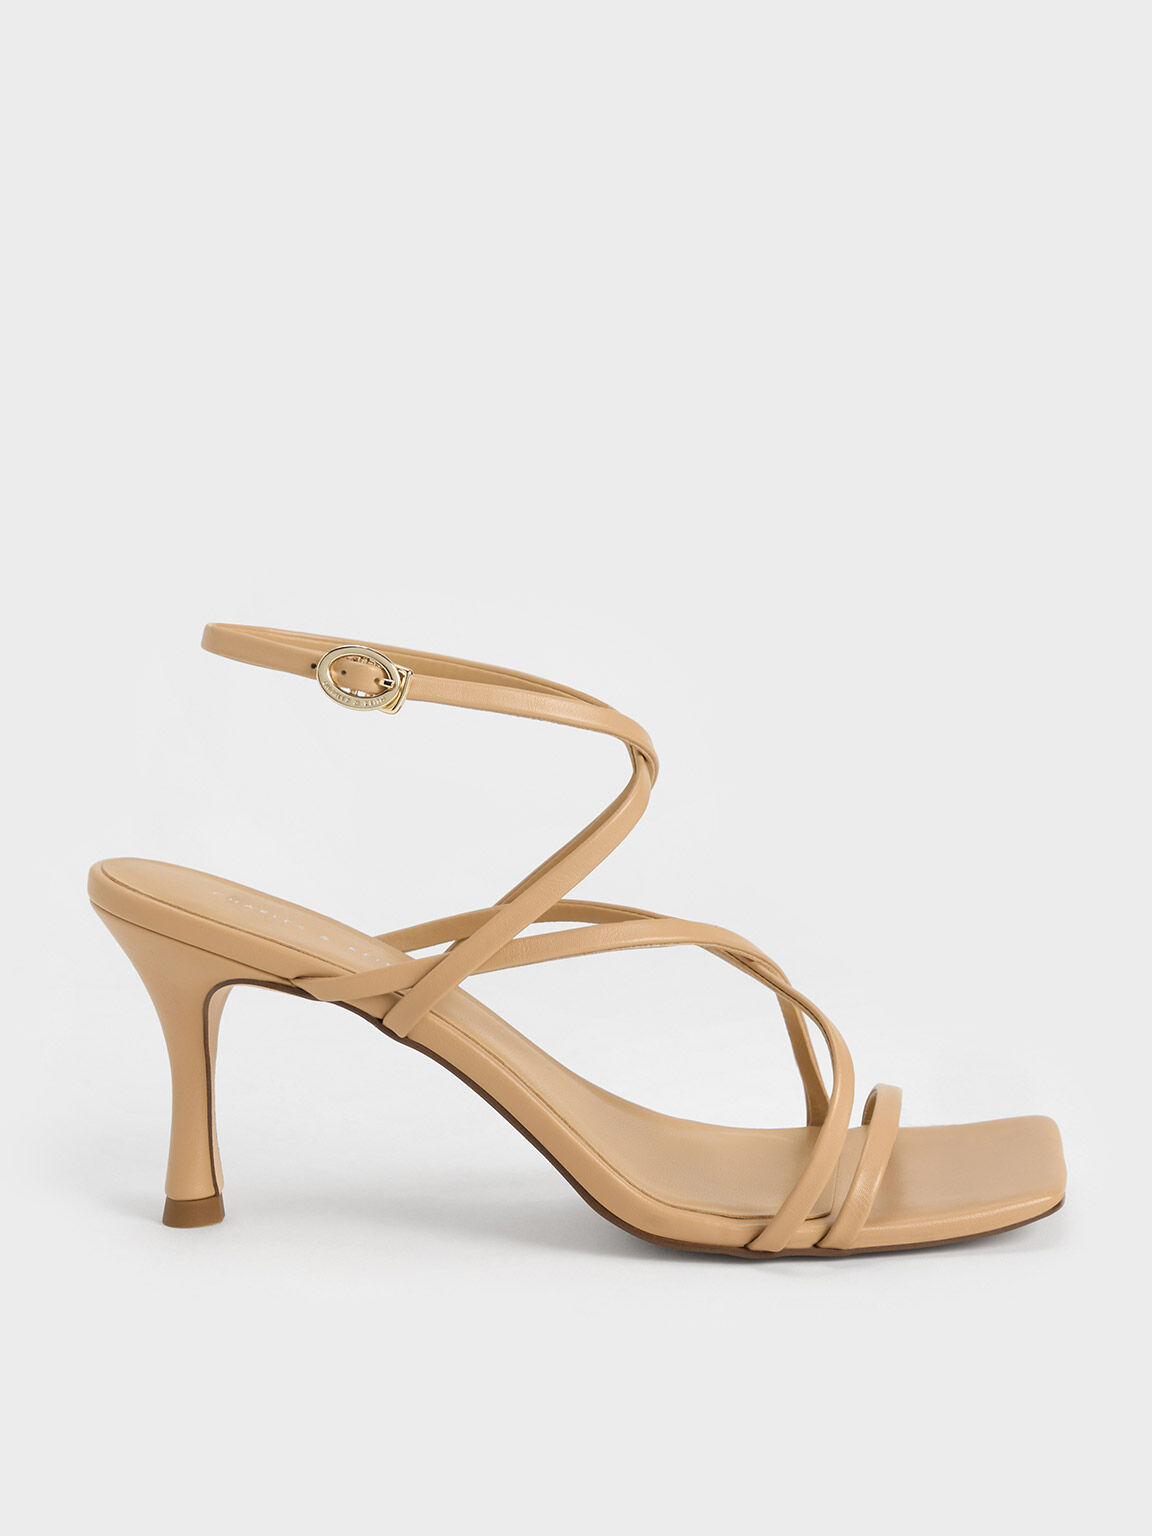 Sandal Strappy Textured Crossover, Tan, hi-res